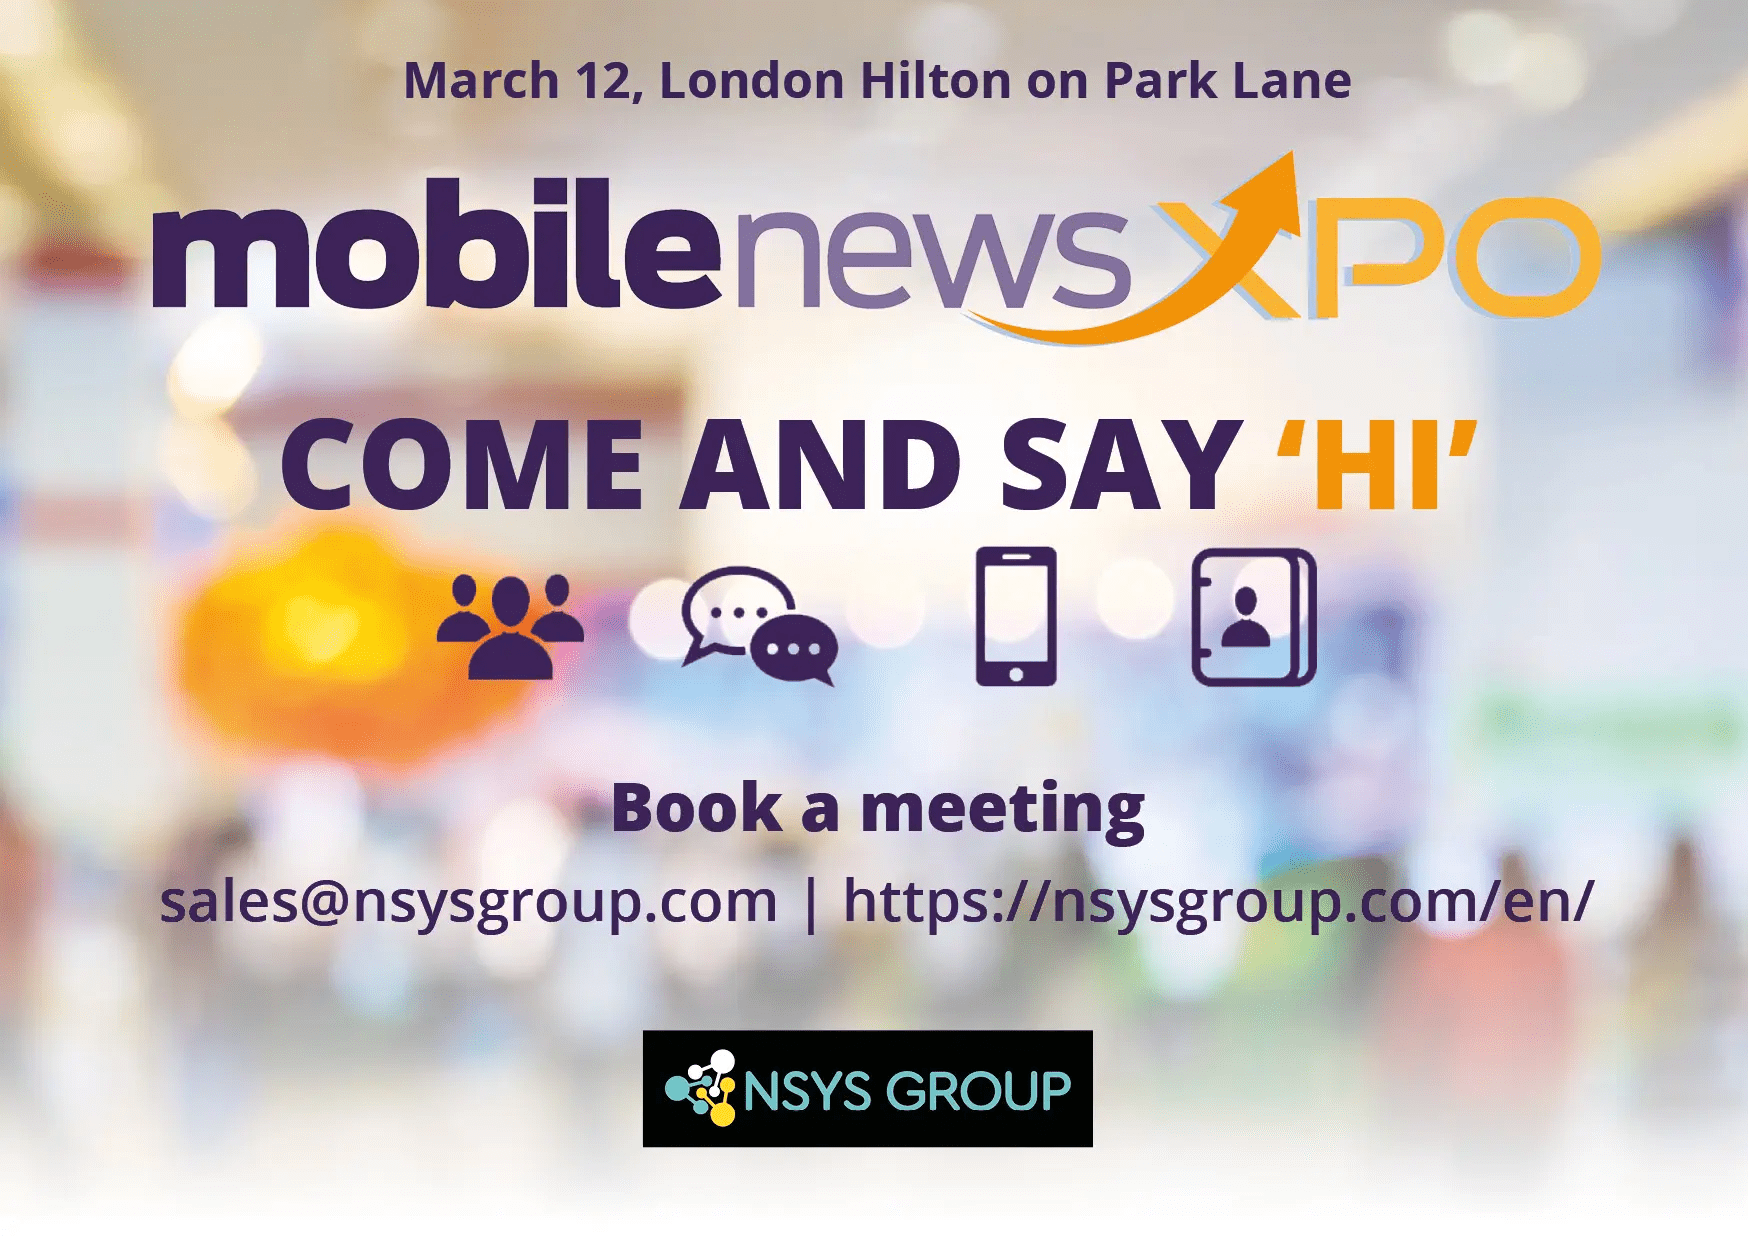 MWC 2020 已取消，但 Mobile News XPO 即将来临 - NSYS GROUP